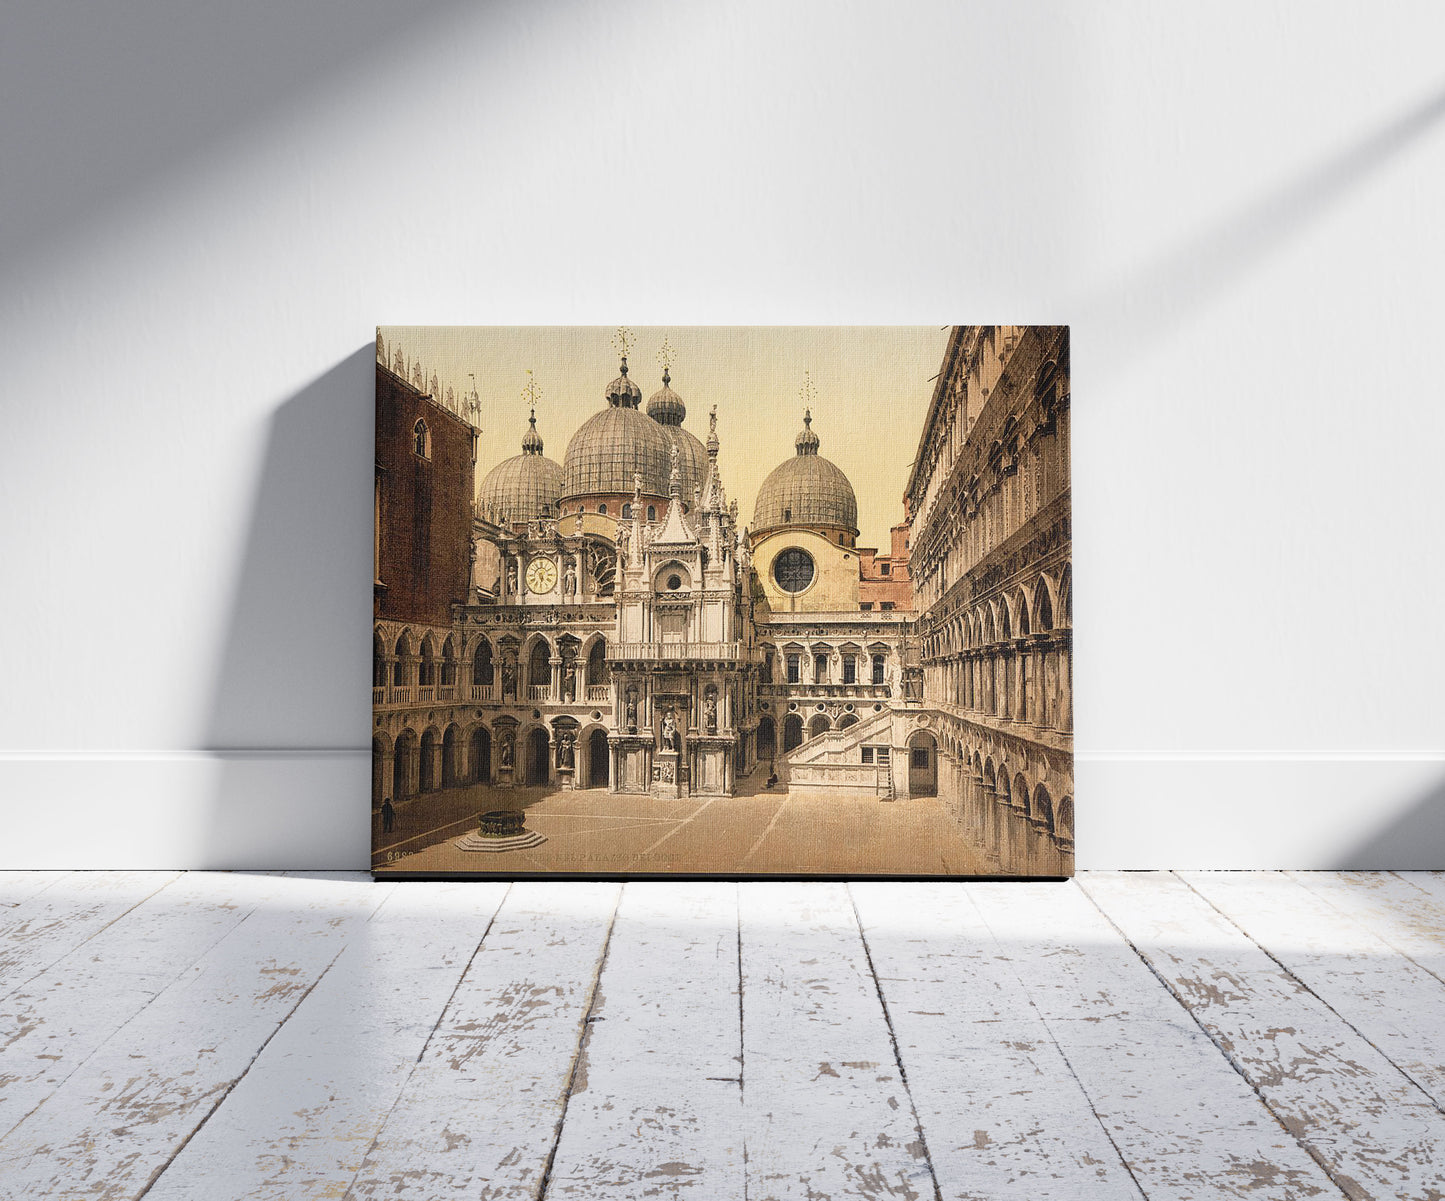 A picture of A court in the Doges' Palace, Venice, Italy